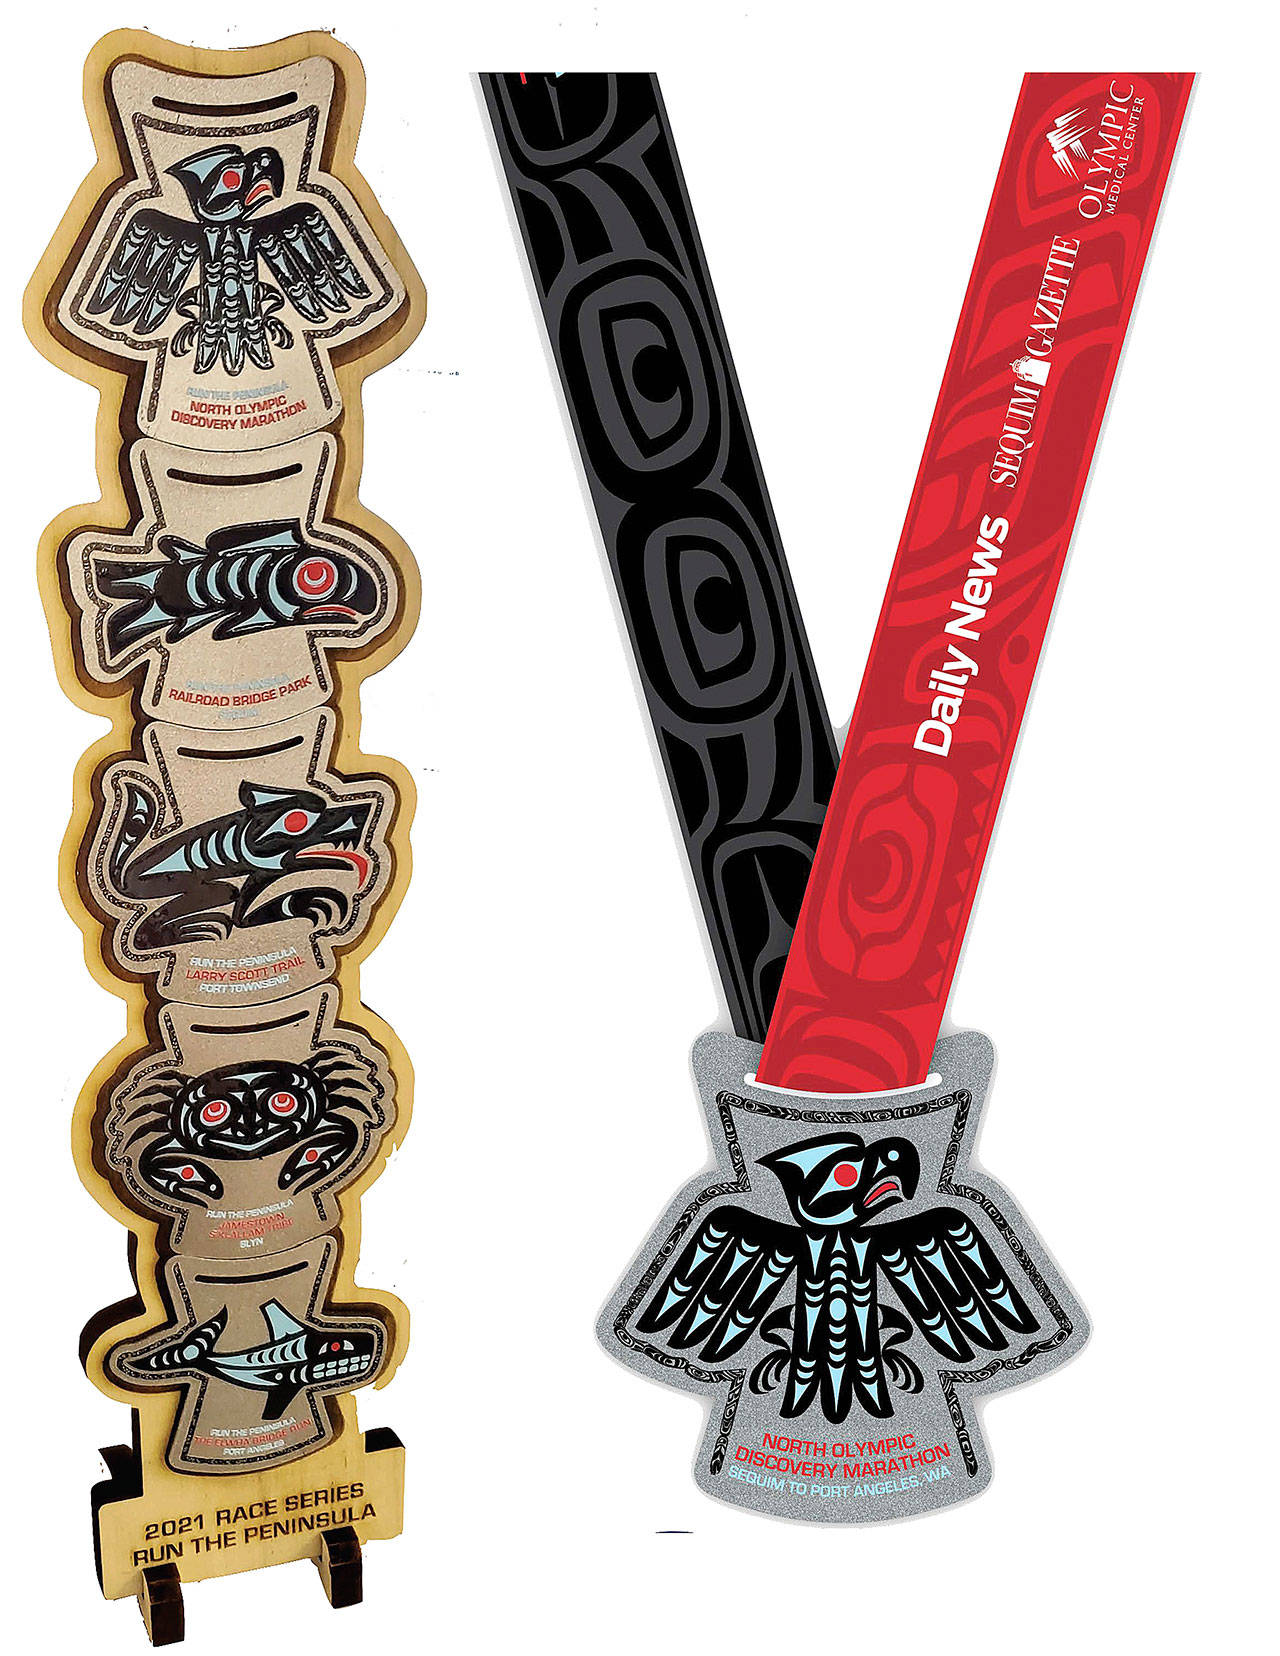 The Port Angeles Marathon Association partnered with the Lower Elwha Klallam Tribe and the Jamestown S’Klallam Tribe to create the 2021 medals for the Run the Peninsula series. (Port Angeles Marathon Association)